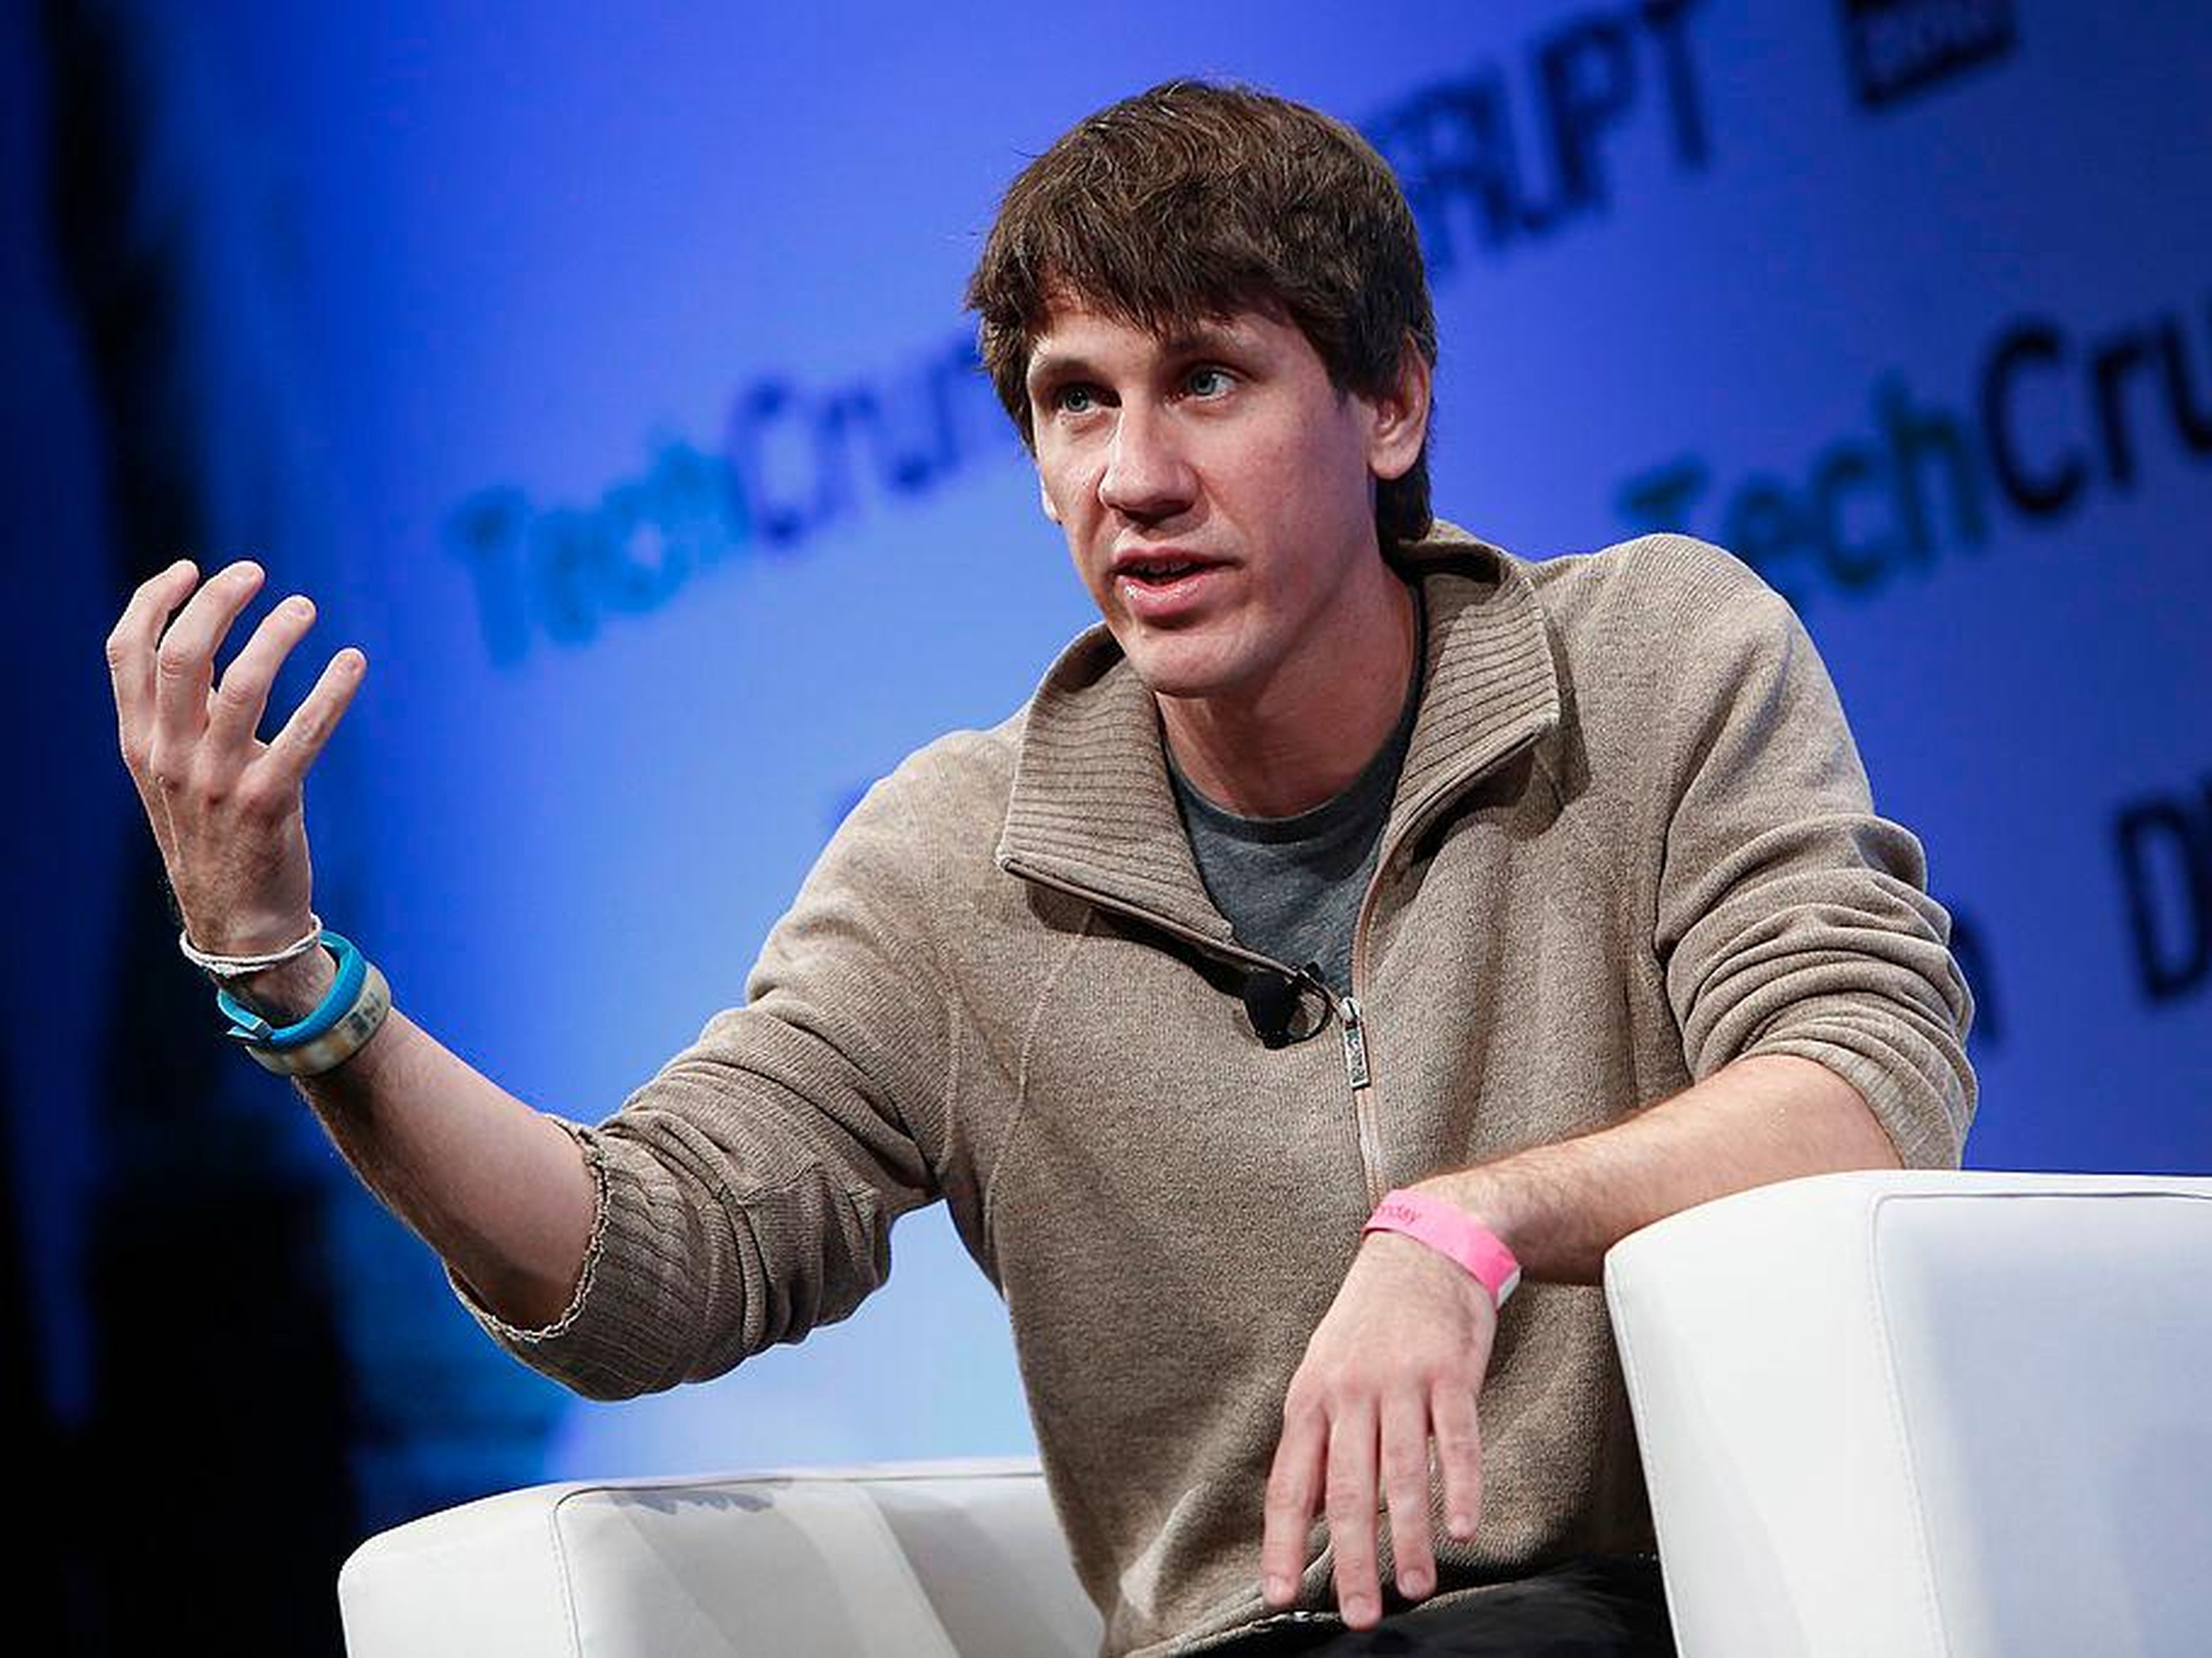 Dodgeball, a service that let users check in at locations, was purchased by Google in 2005. Its founders, which included Dennis Crowley, left Google seemingly on bad terms in 2007 and Crowley went on to build a very similar